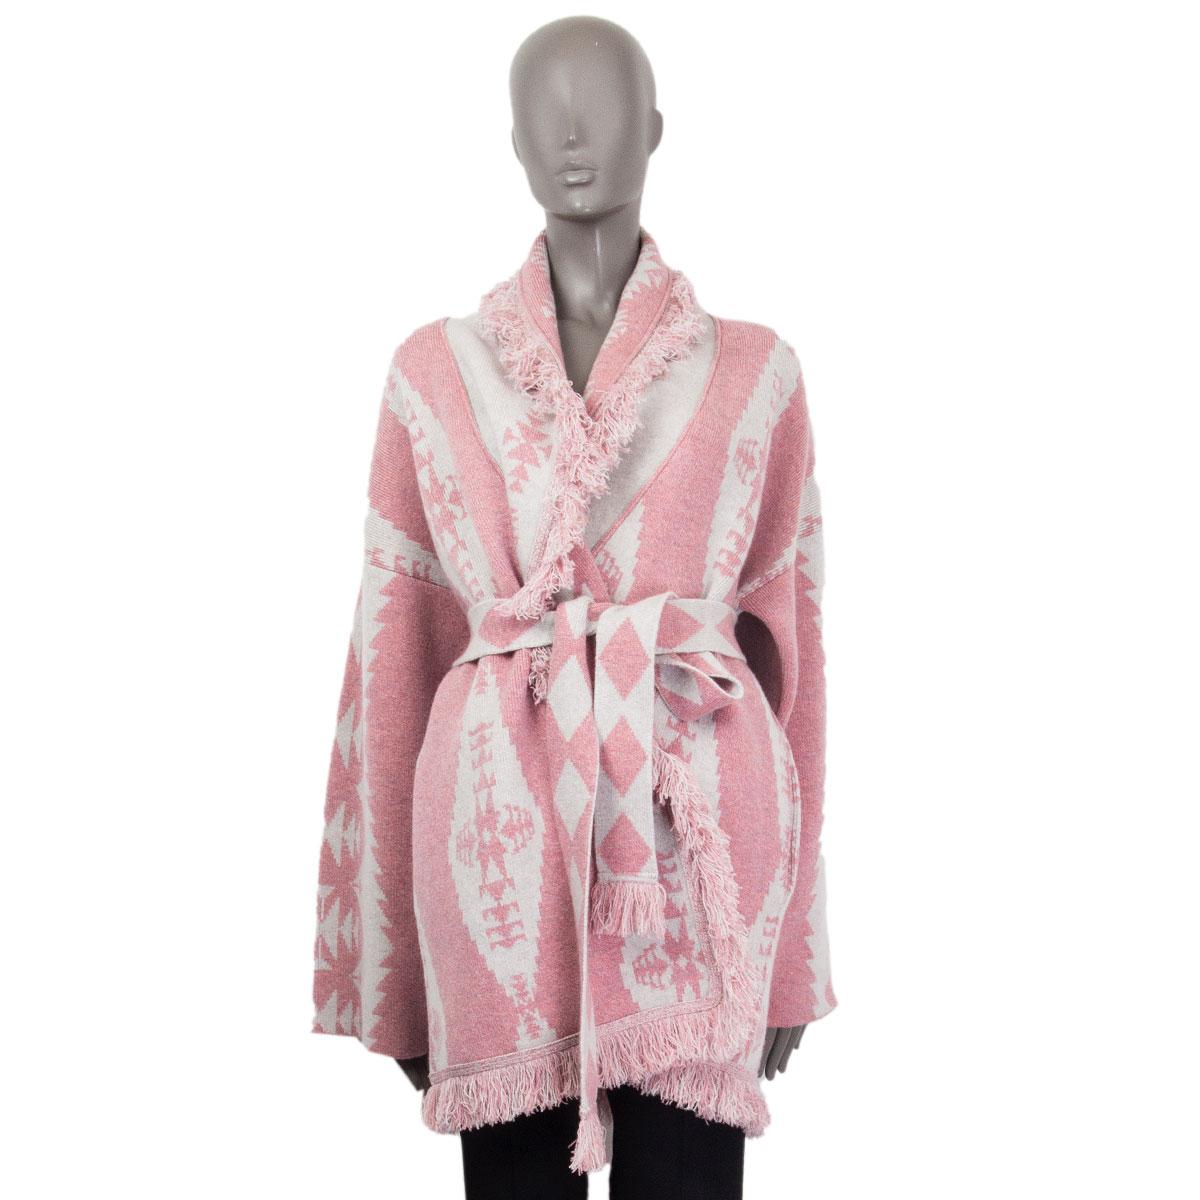 Alanui 'Baja California Diamonds' cardigan in baby pink and light grey cashmere (97%) and lycra (3%) with a shawl collar, fringed hems and pockets. Ties with a matching belt. Unlined. Virtually new. 

Tag Size L
Size L
Shoulder Width 42cm